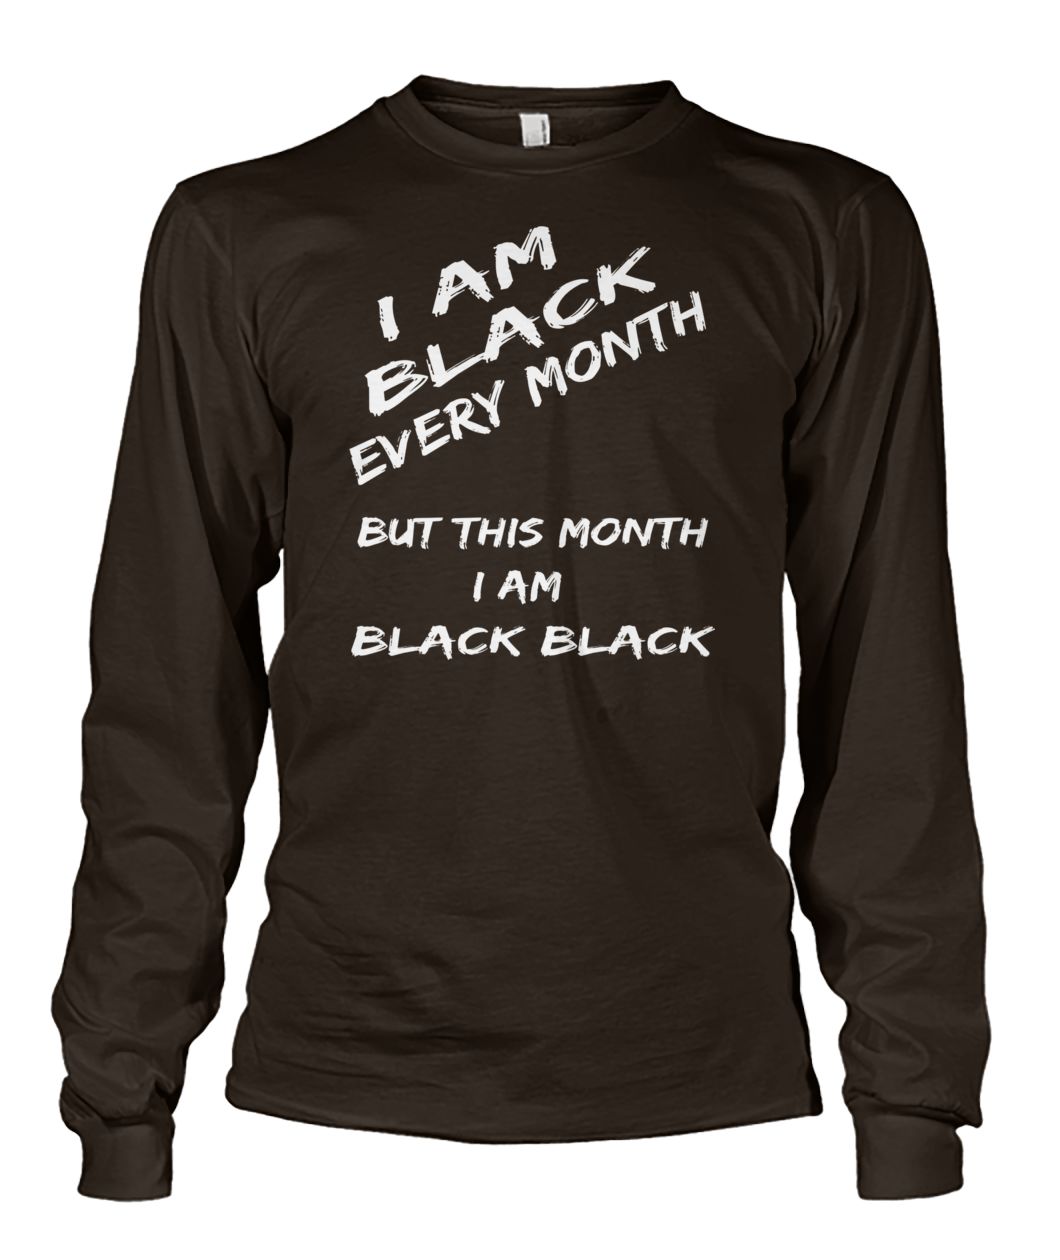 Black history month I am black every month but this month I am black black unisex long sleeve